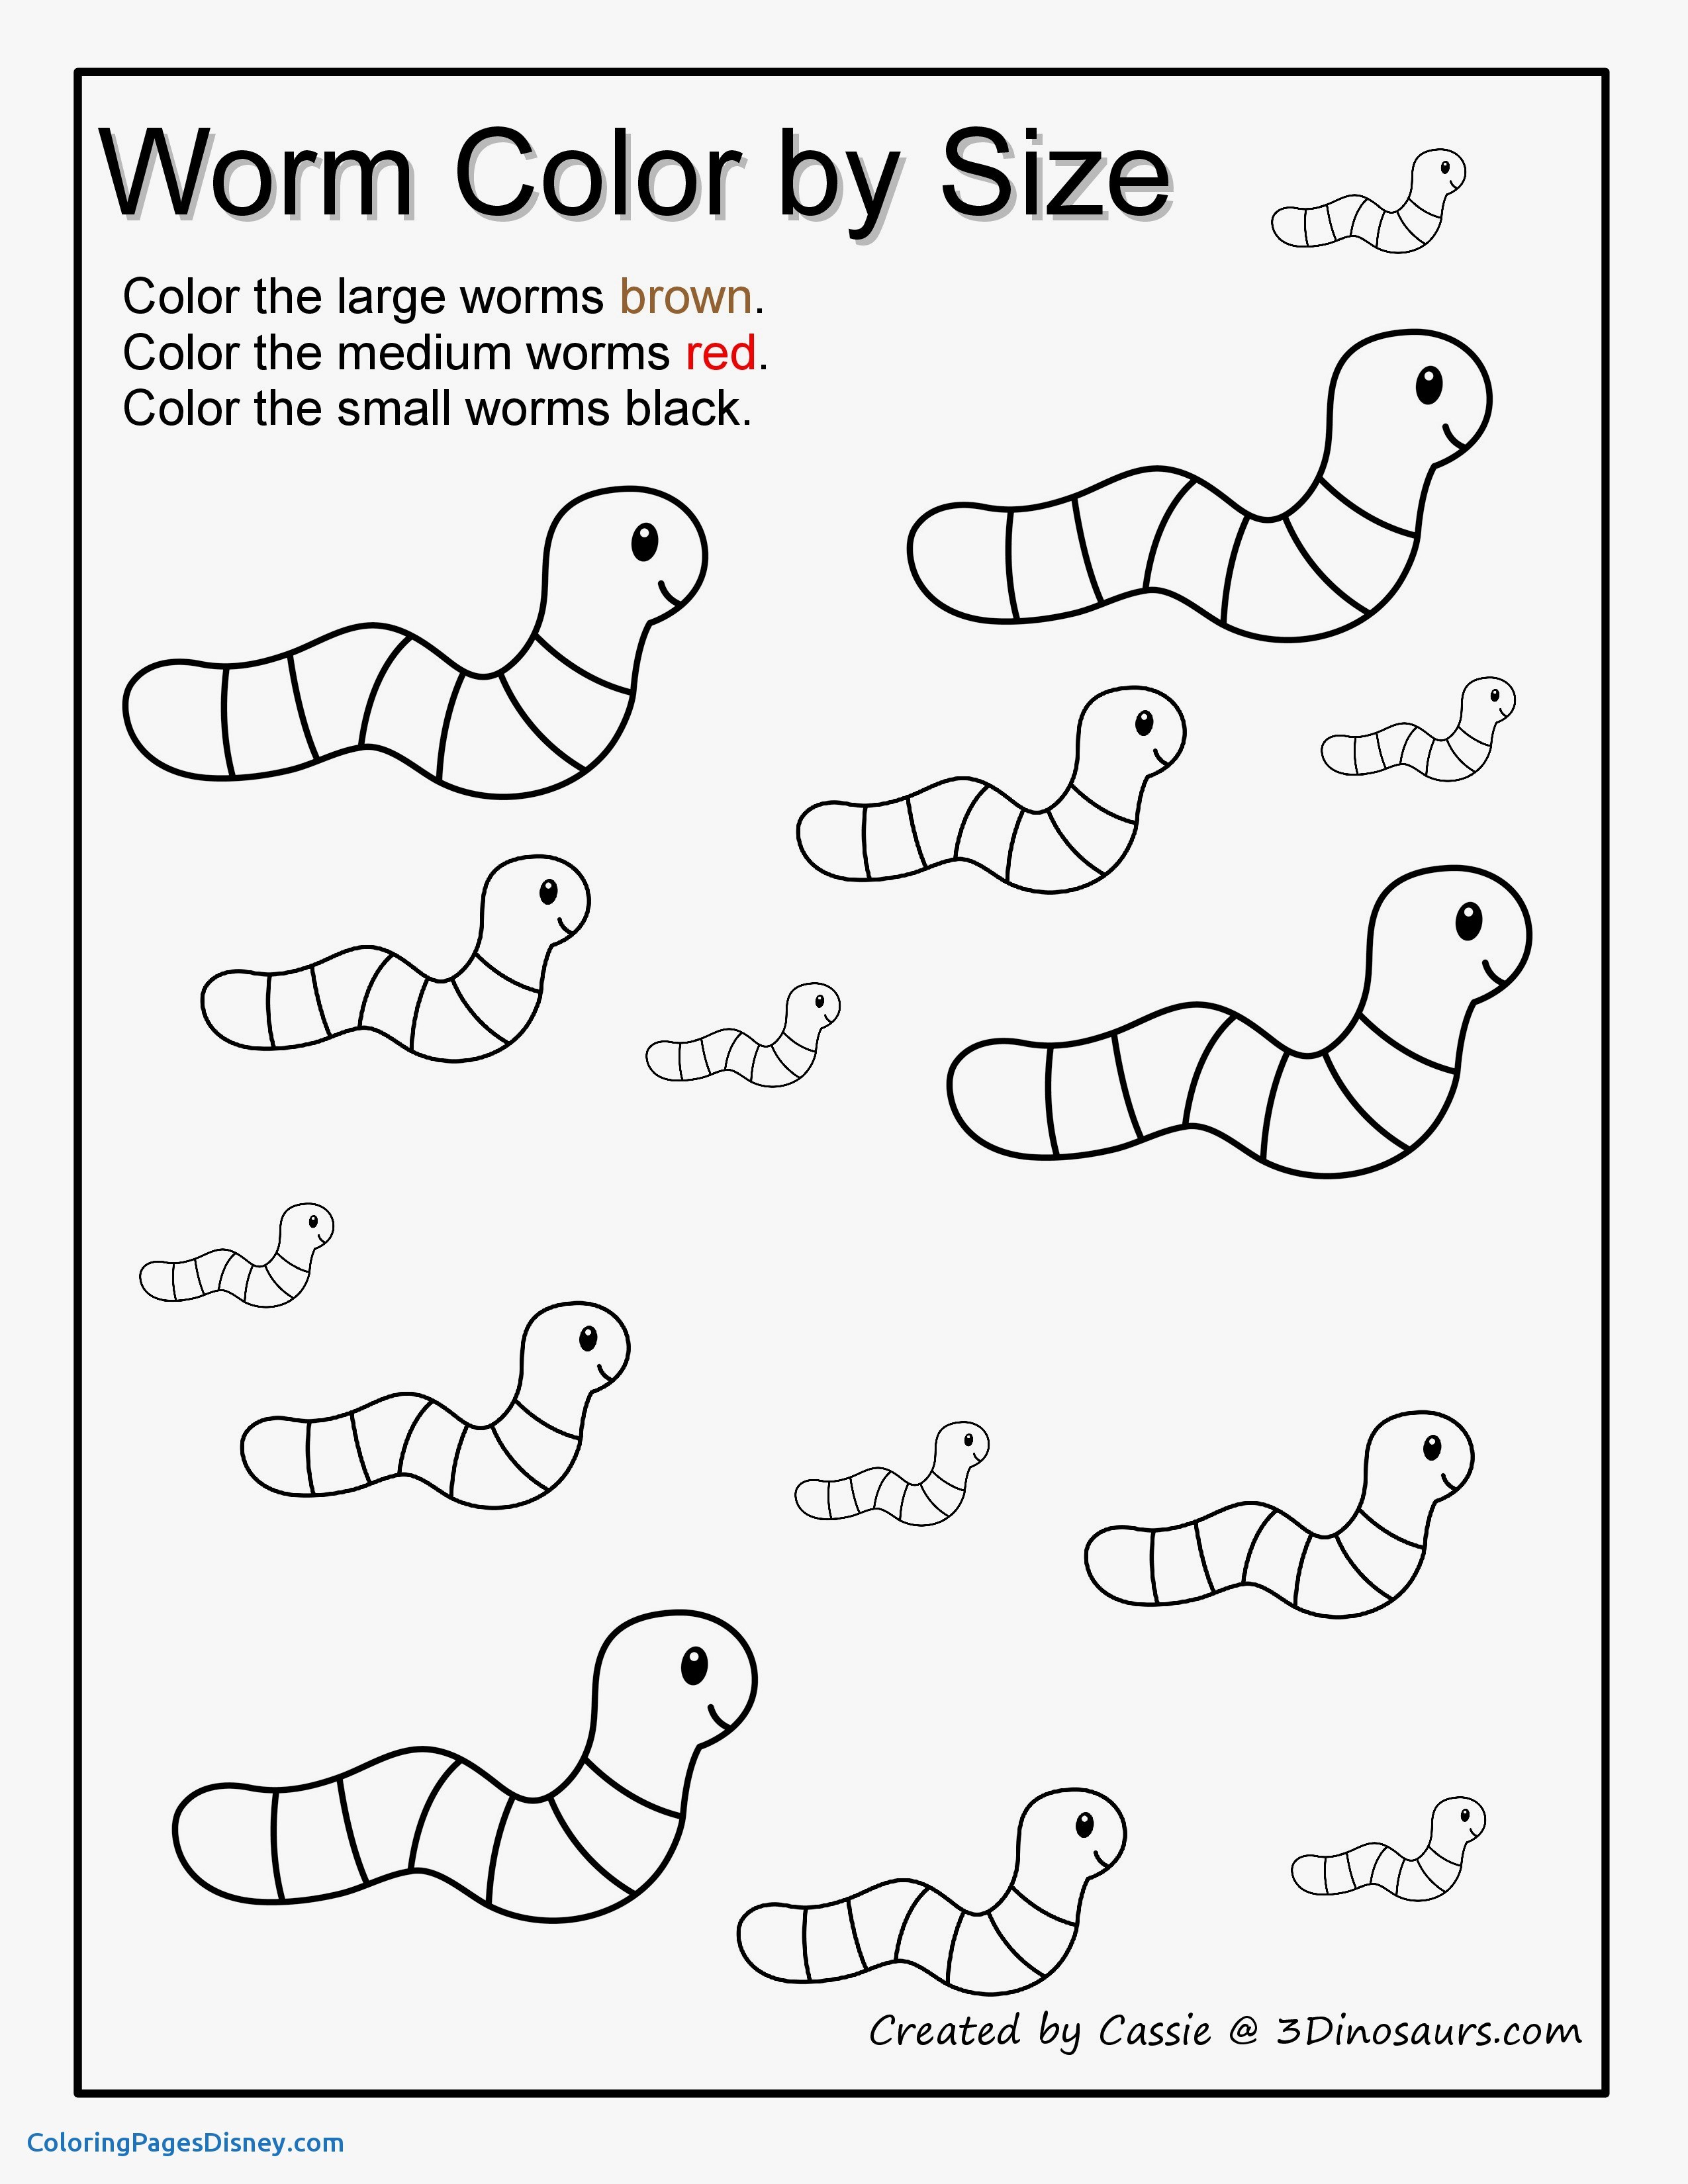 worm-coloring-pages-at-getdrawings-free-download